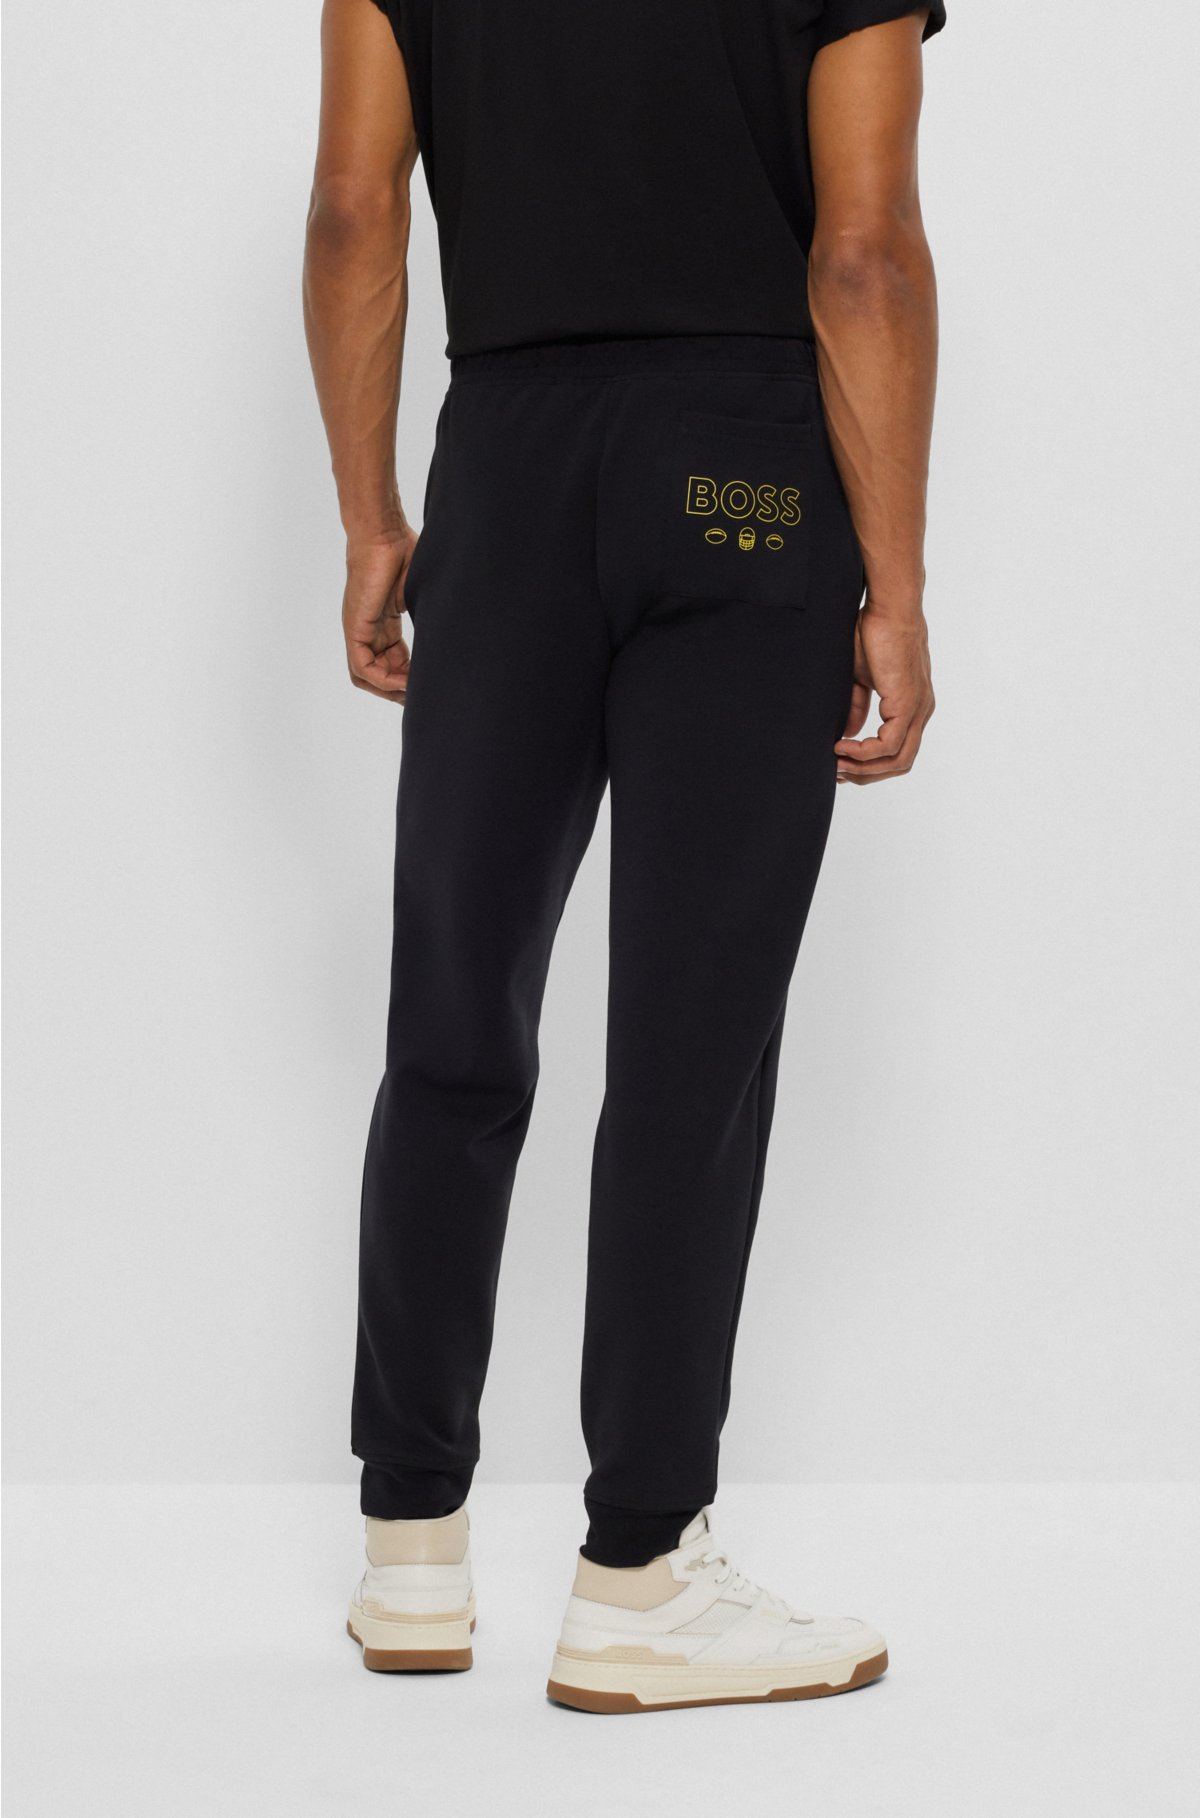 BOSS x NFL cotton-blend tracksuit bottoms with collaborative branding, Rams